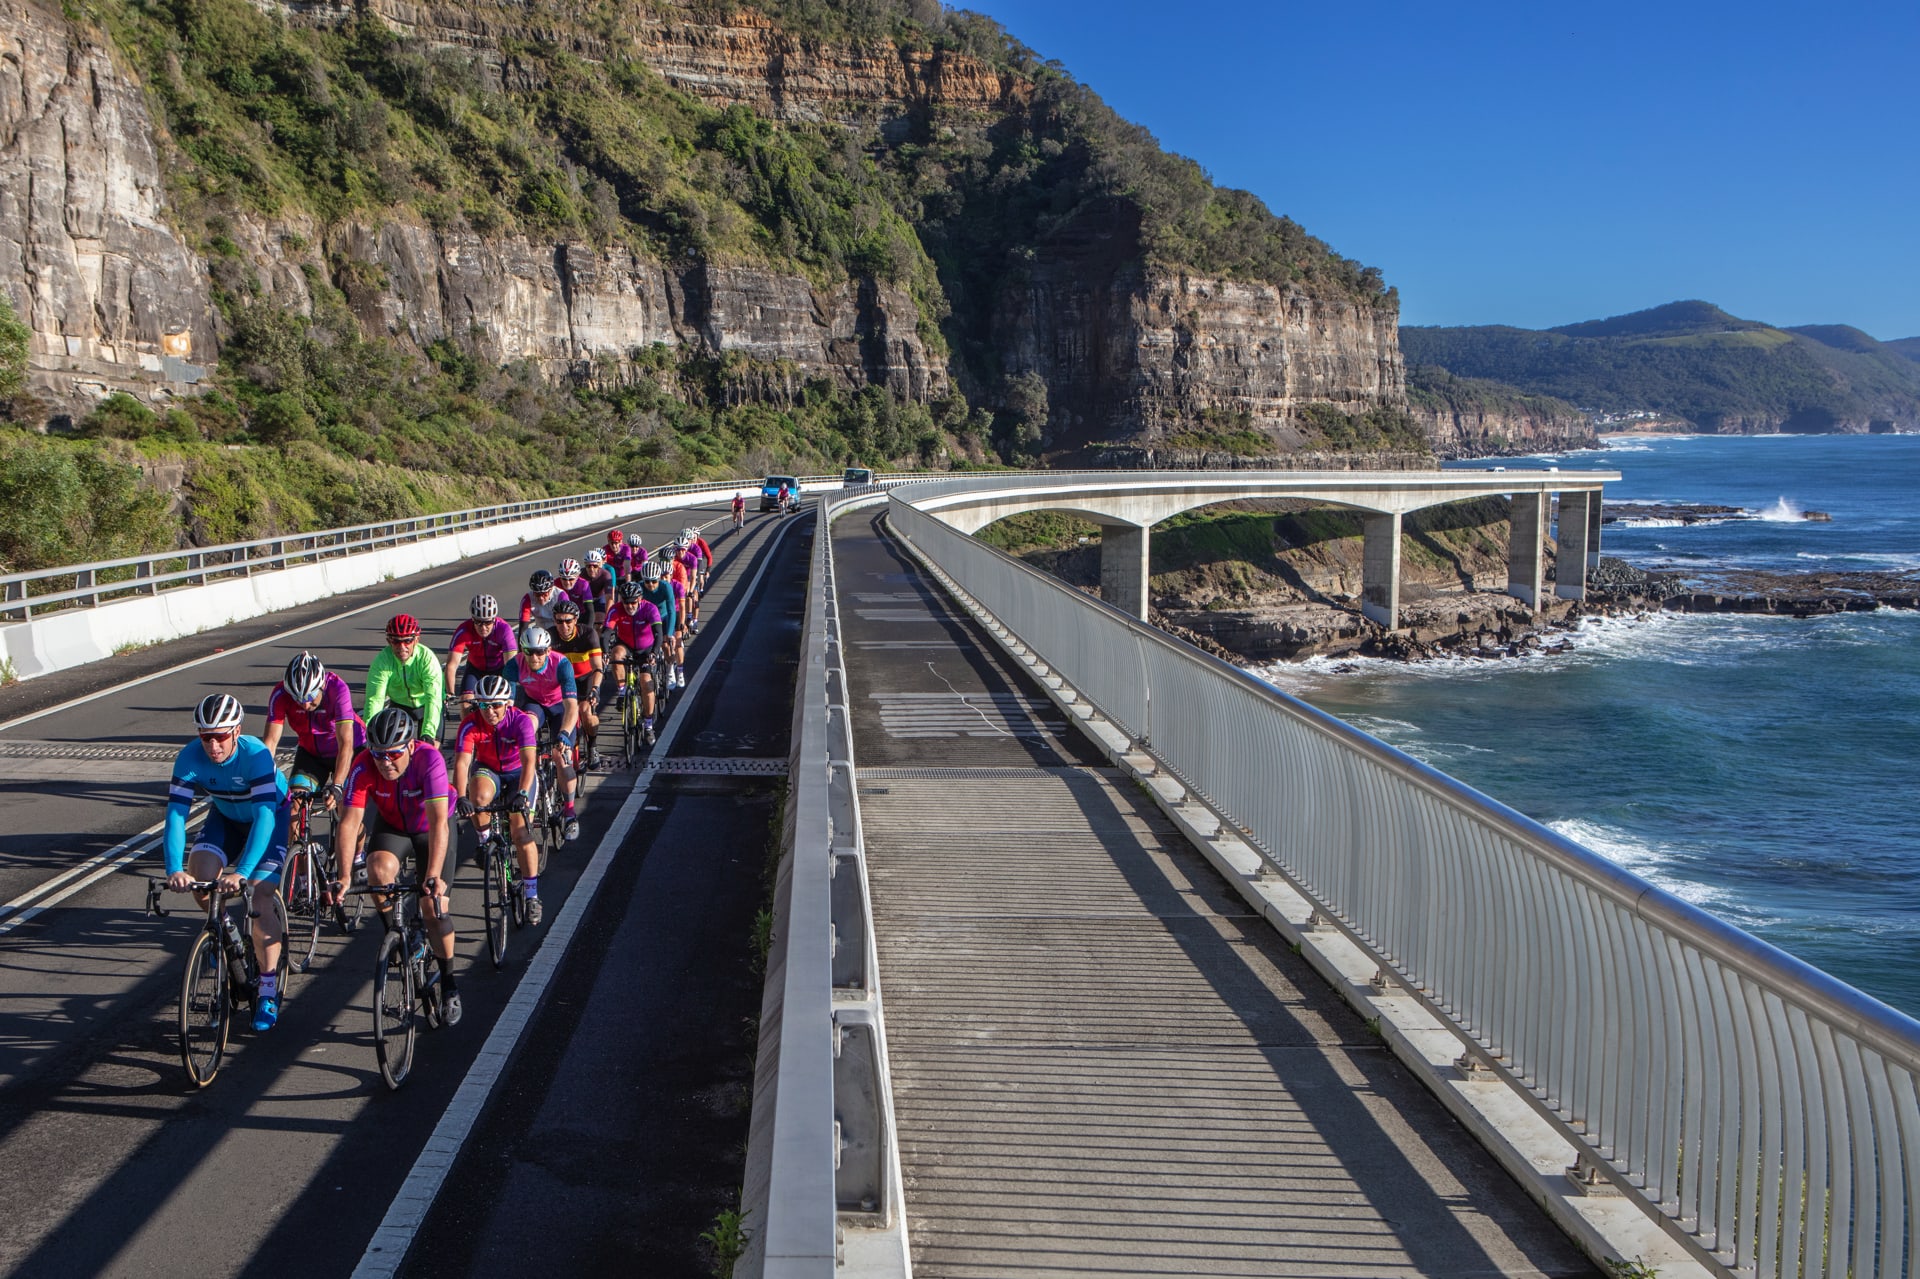 First-ride-of-part-of-the-Wollongong-2022-UCI-Road-World-Championship-Elite-Road-Race-course_101221_Sea-Cliff-Bridge-1